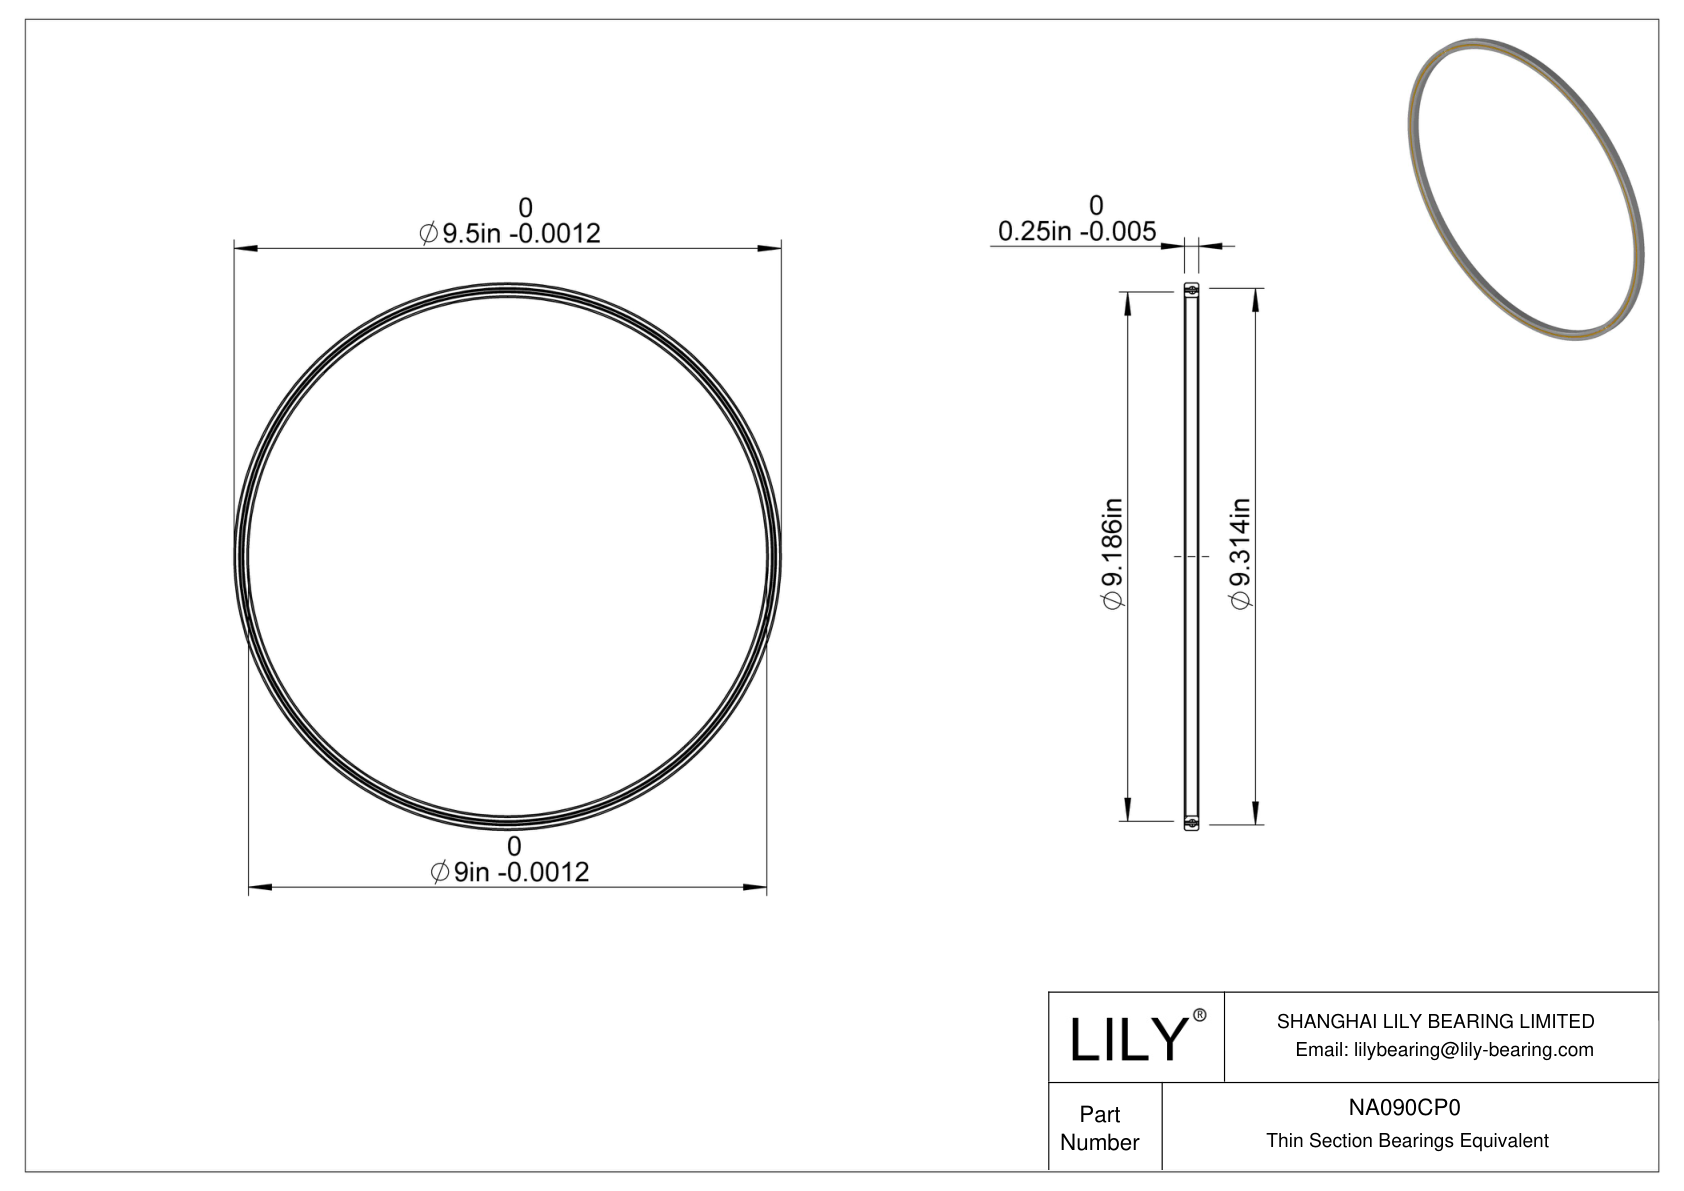 NA090CP0 Constant Section (CS) Bearings cad drawing